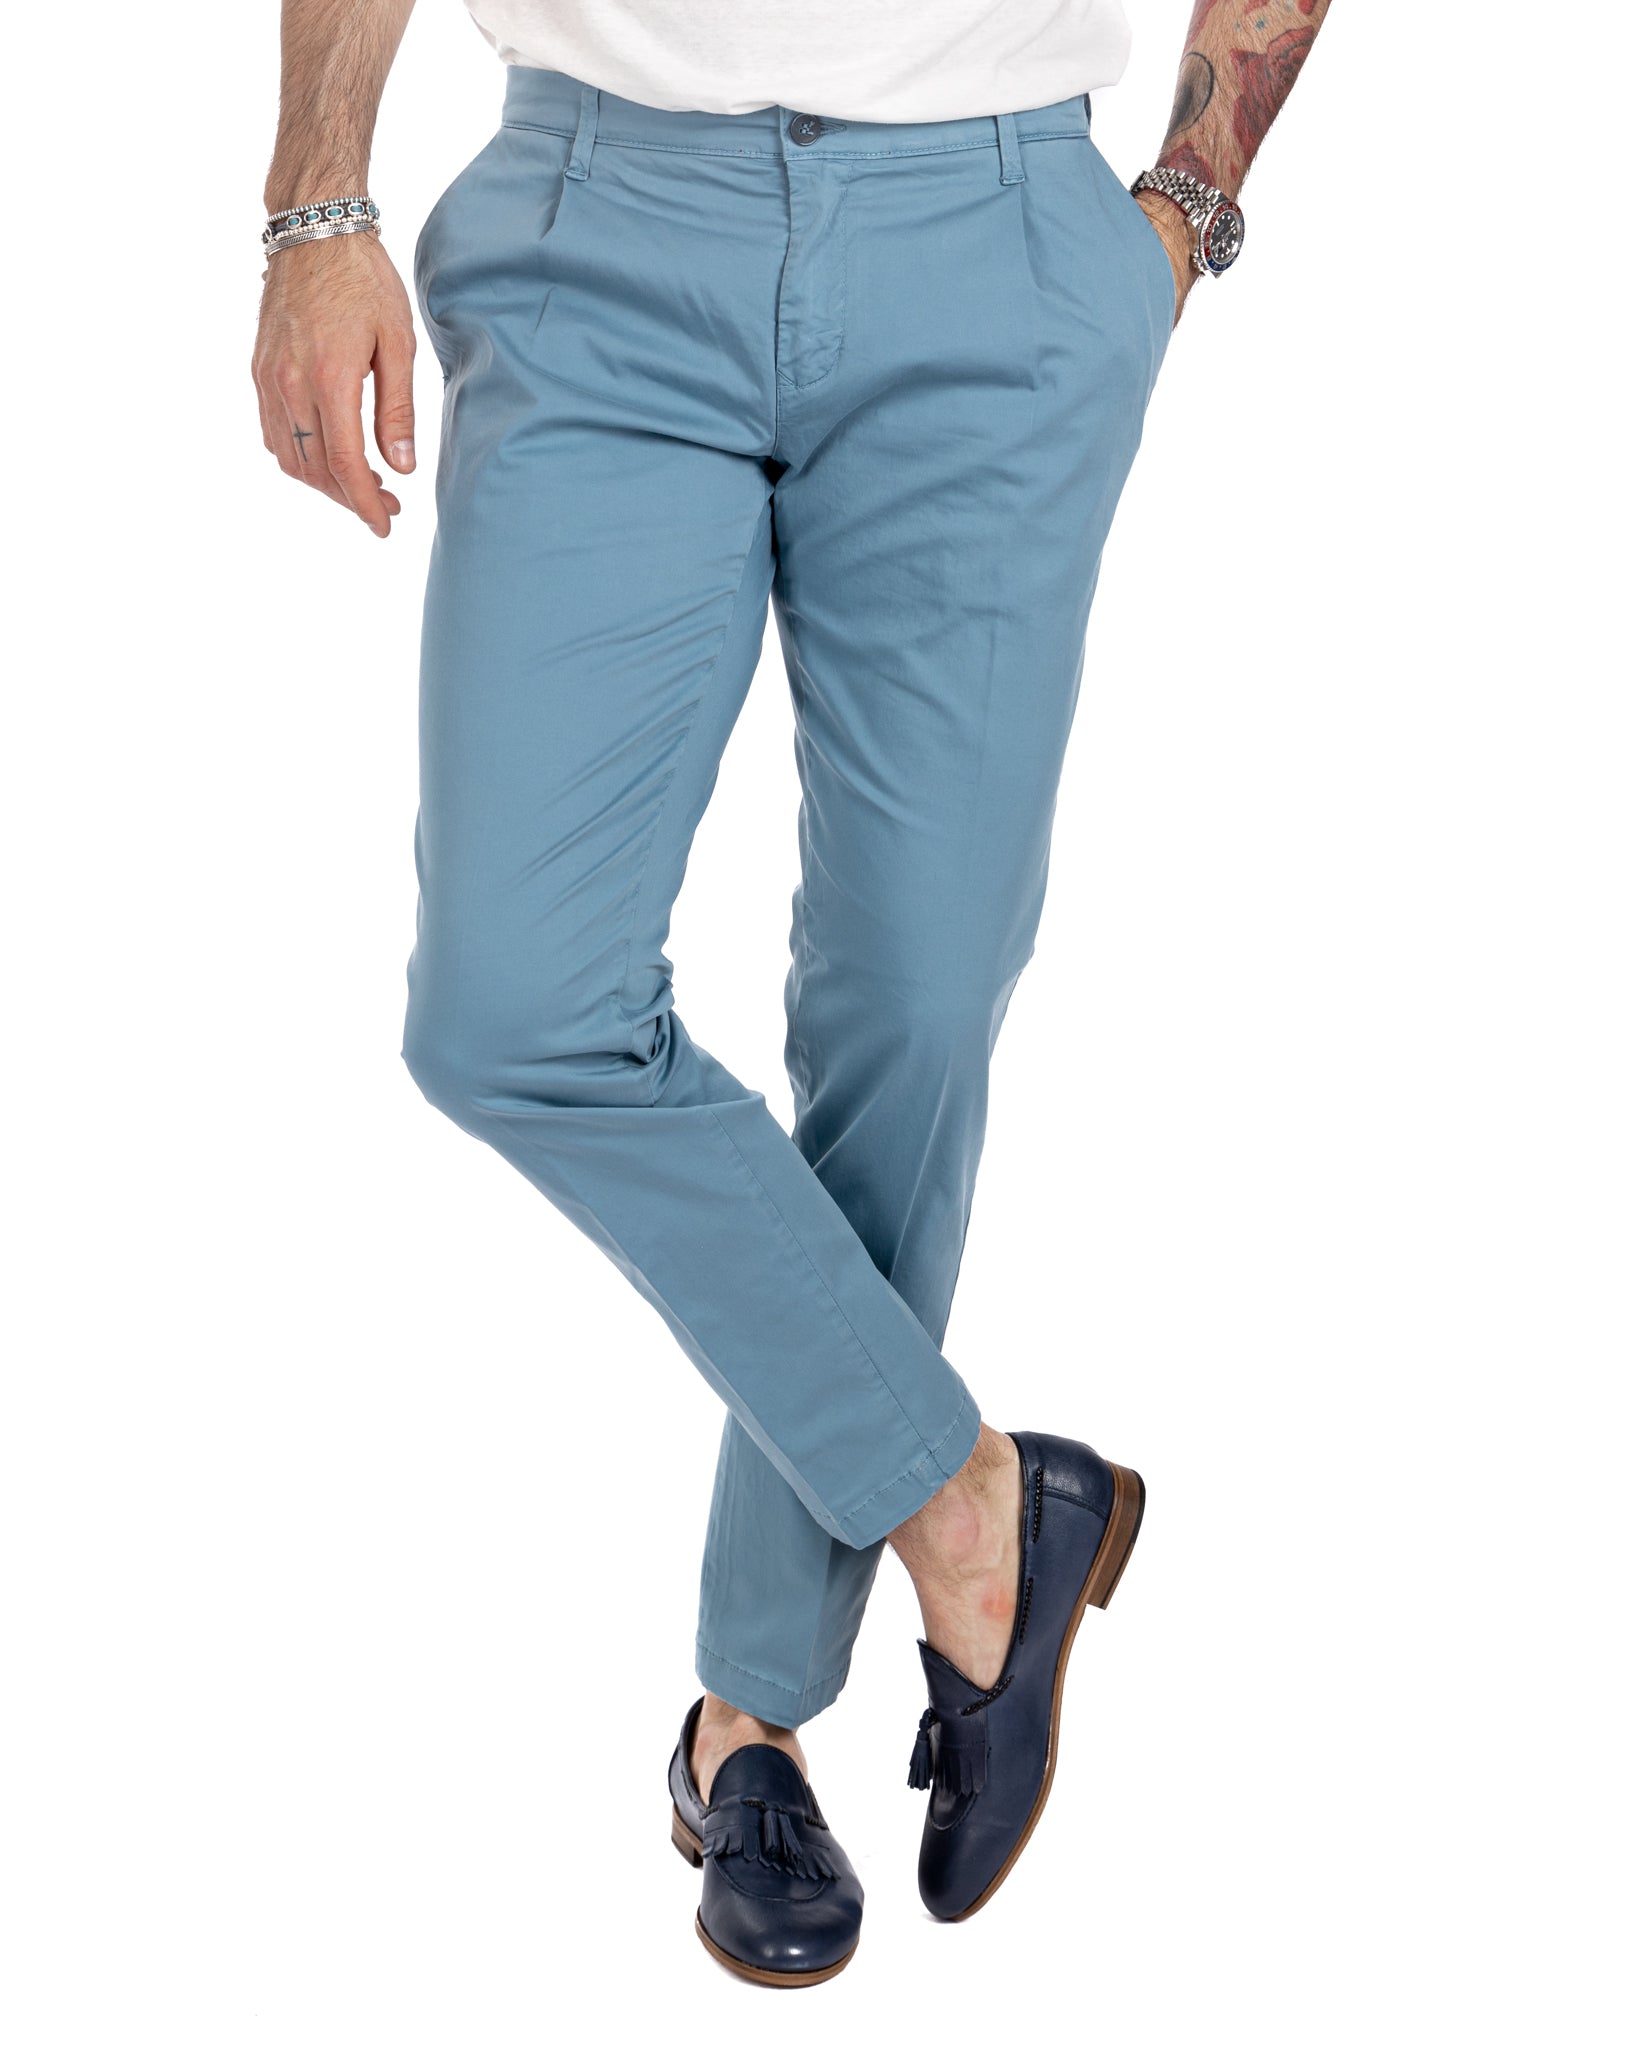 Miles - trousers with teal pleats